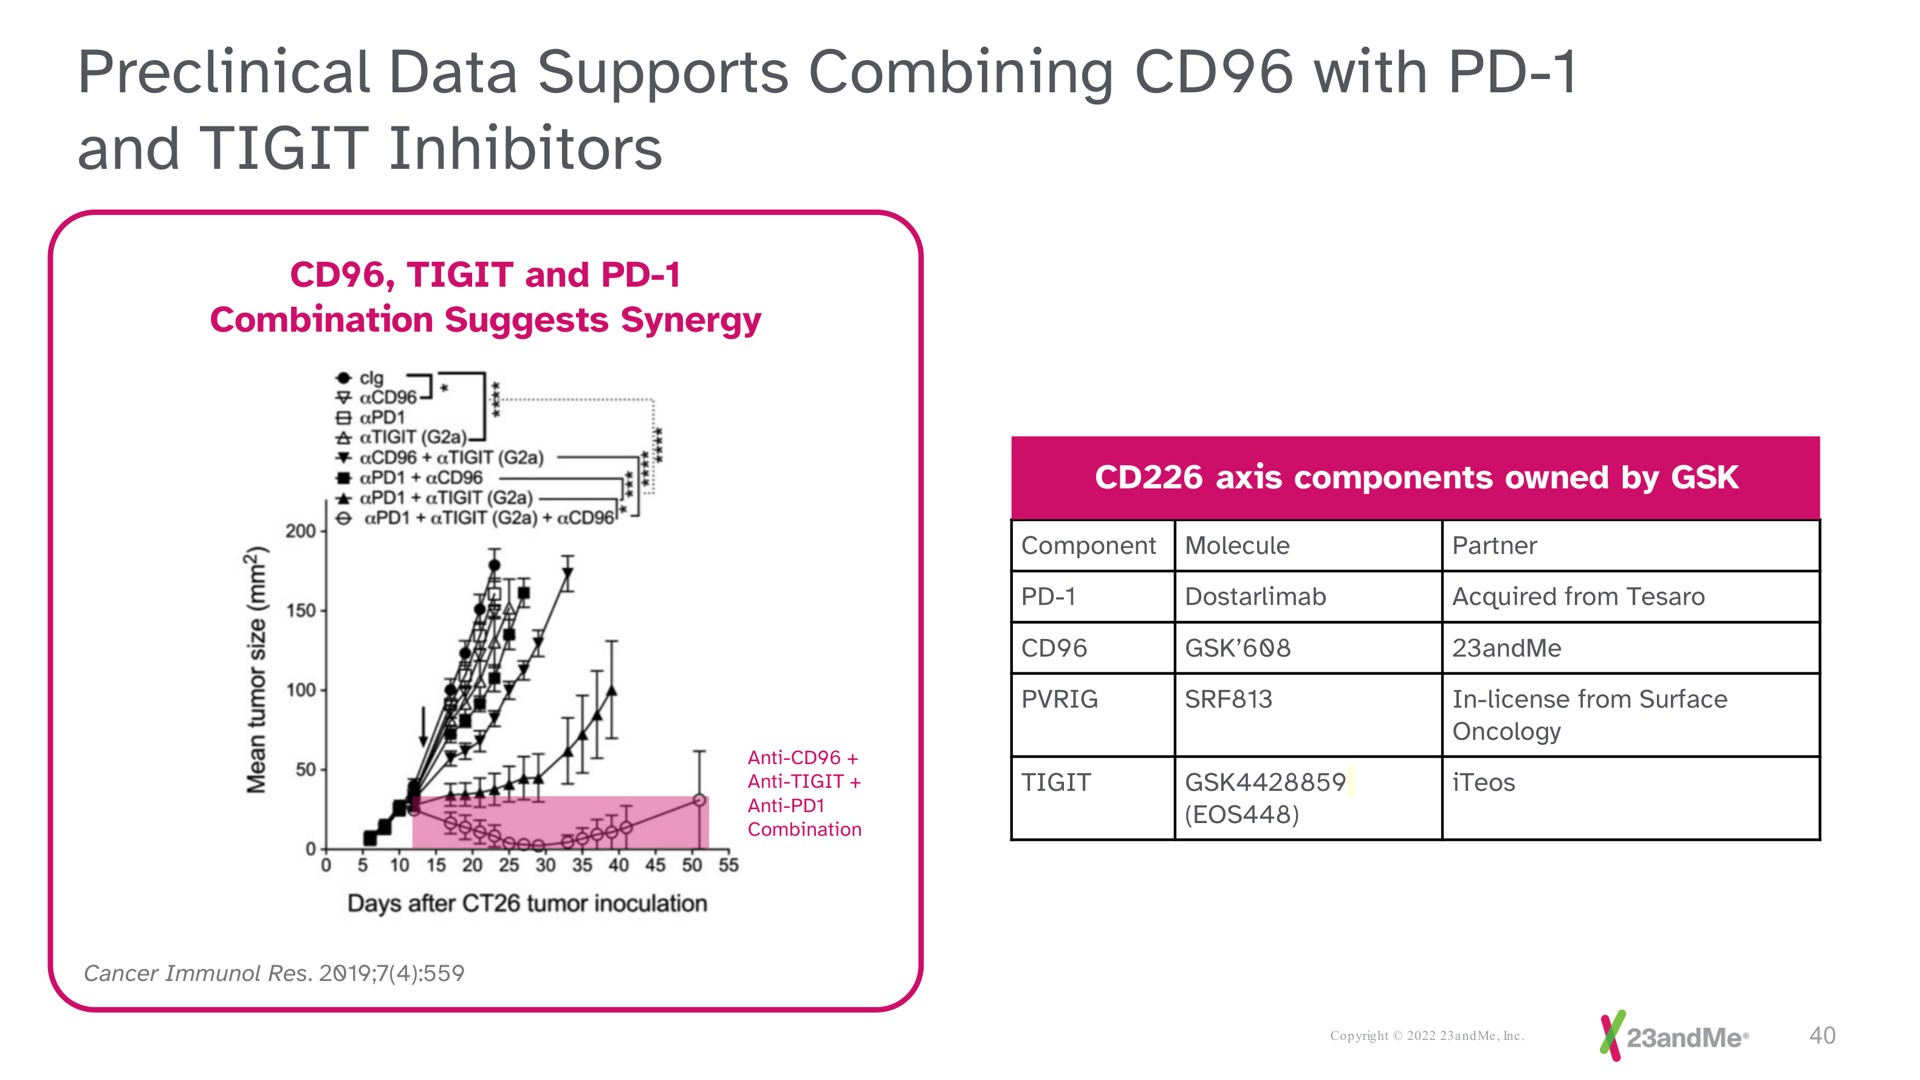 preclinical data supports combining with and inhibitors | 23andMe